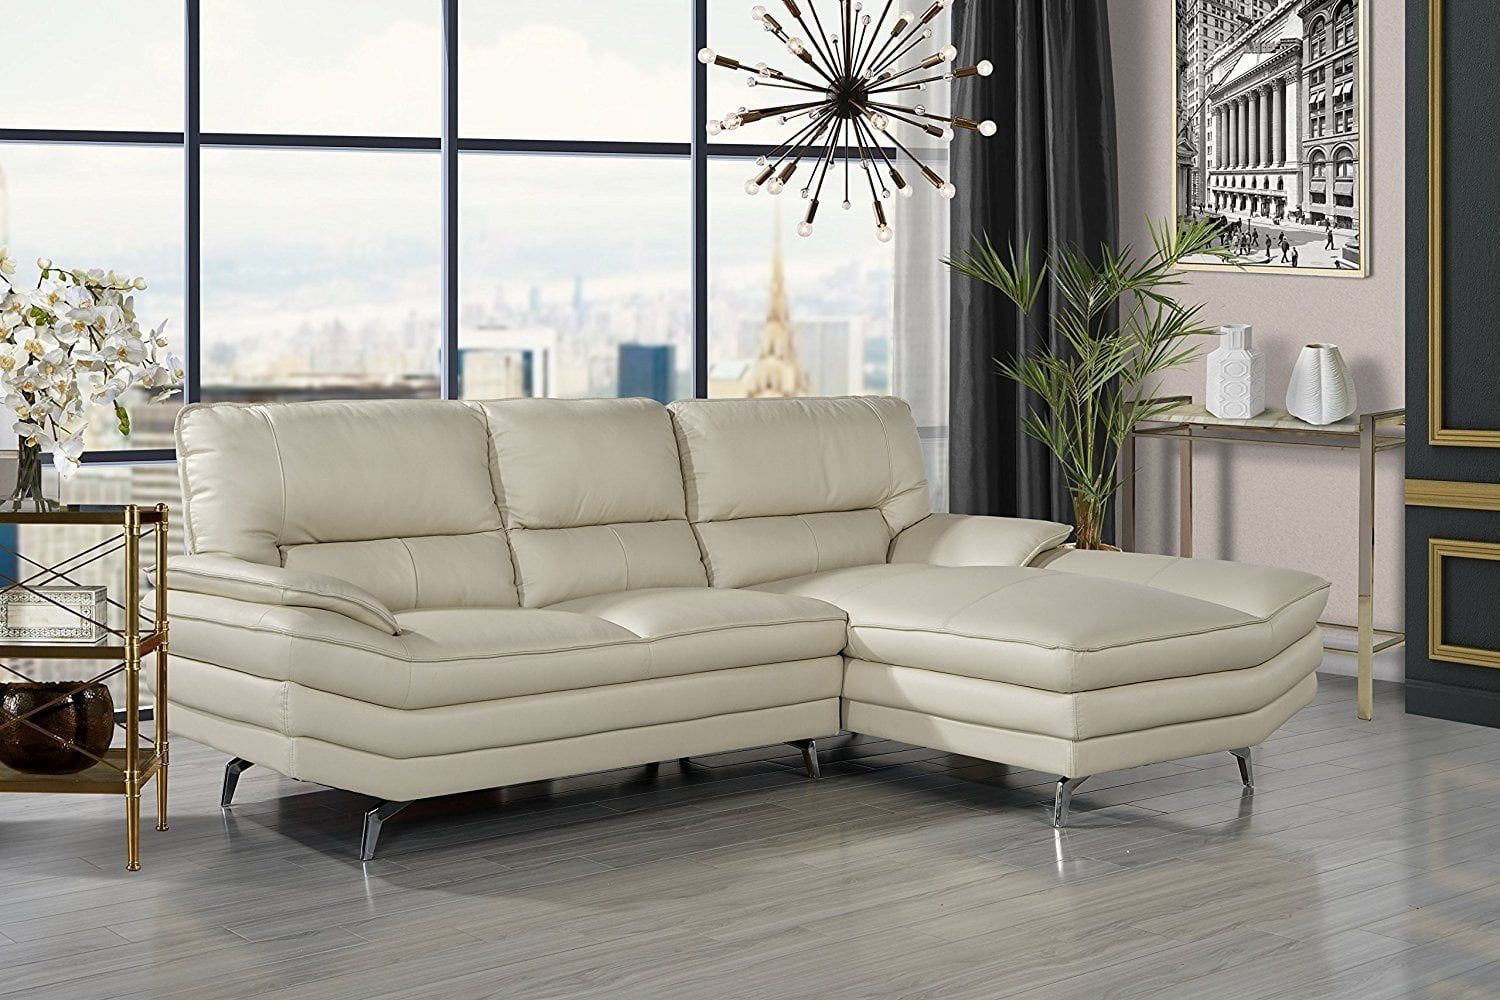 Living Room Leather Sectional Sofa, L Shape Couch With Chaise Lounge For Beige L Shaped Sectional Sofas (View 12 of 20)